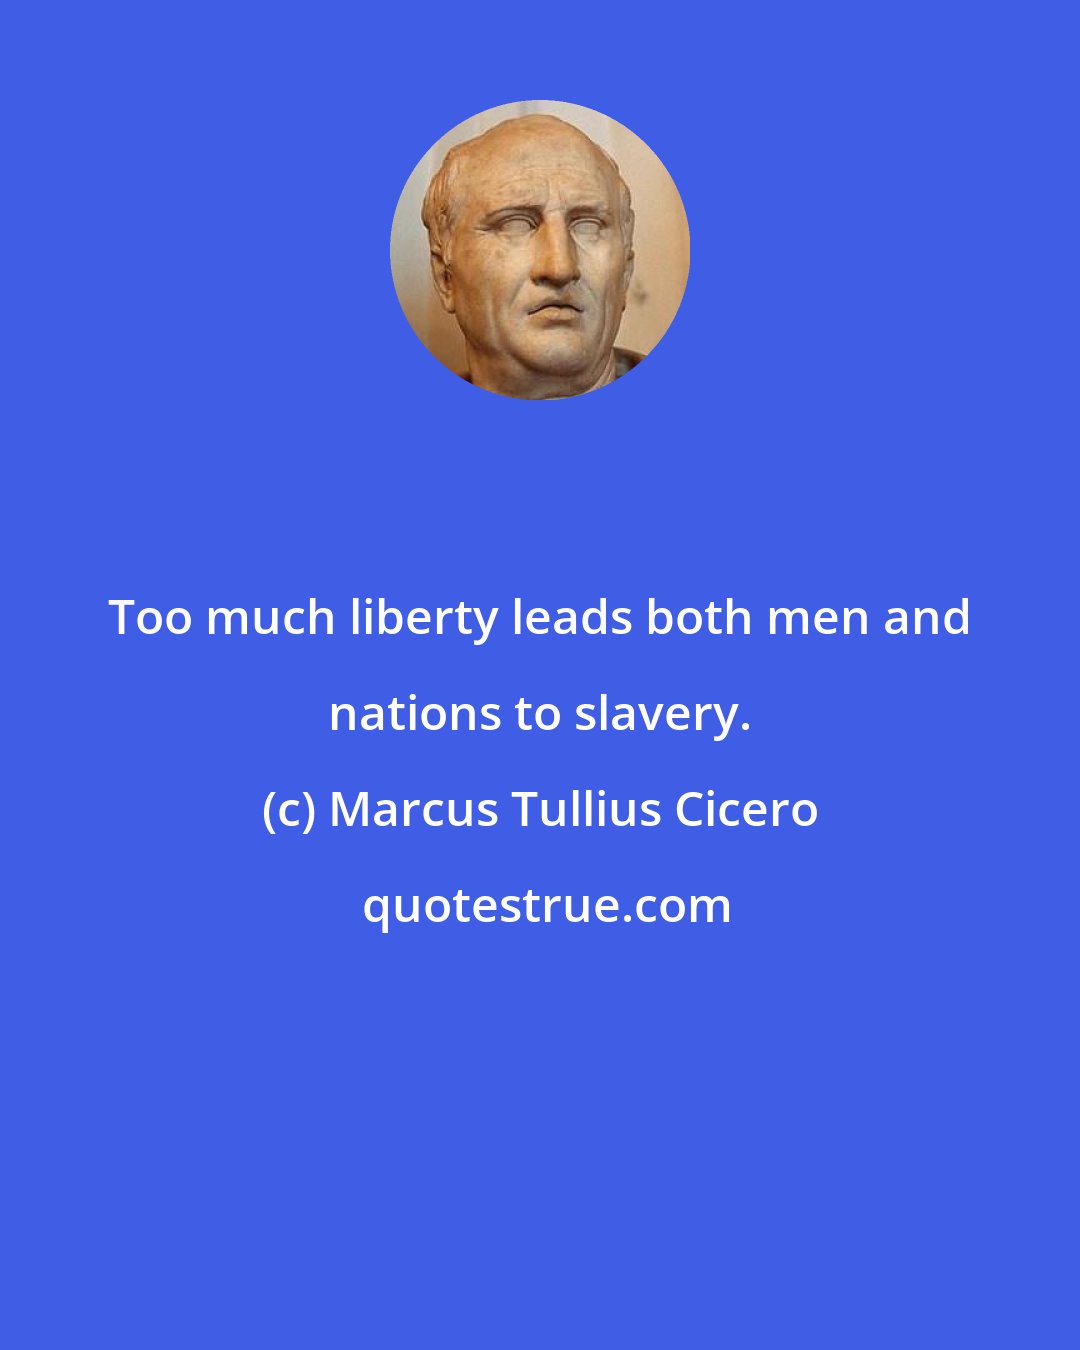 Marcus Tullius Cicero: Too much liberty leads both men and nations to slavery.